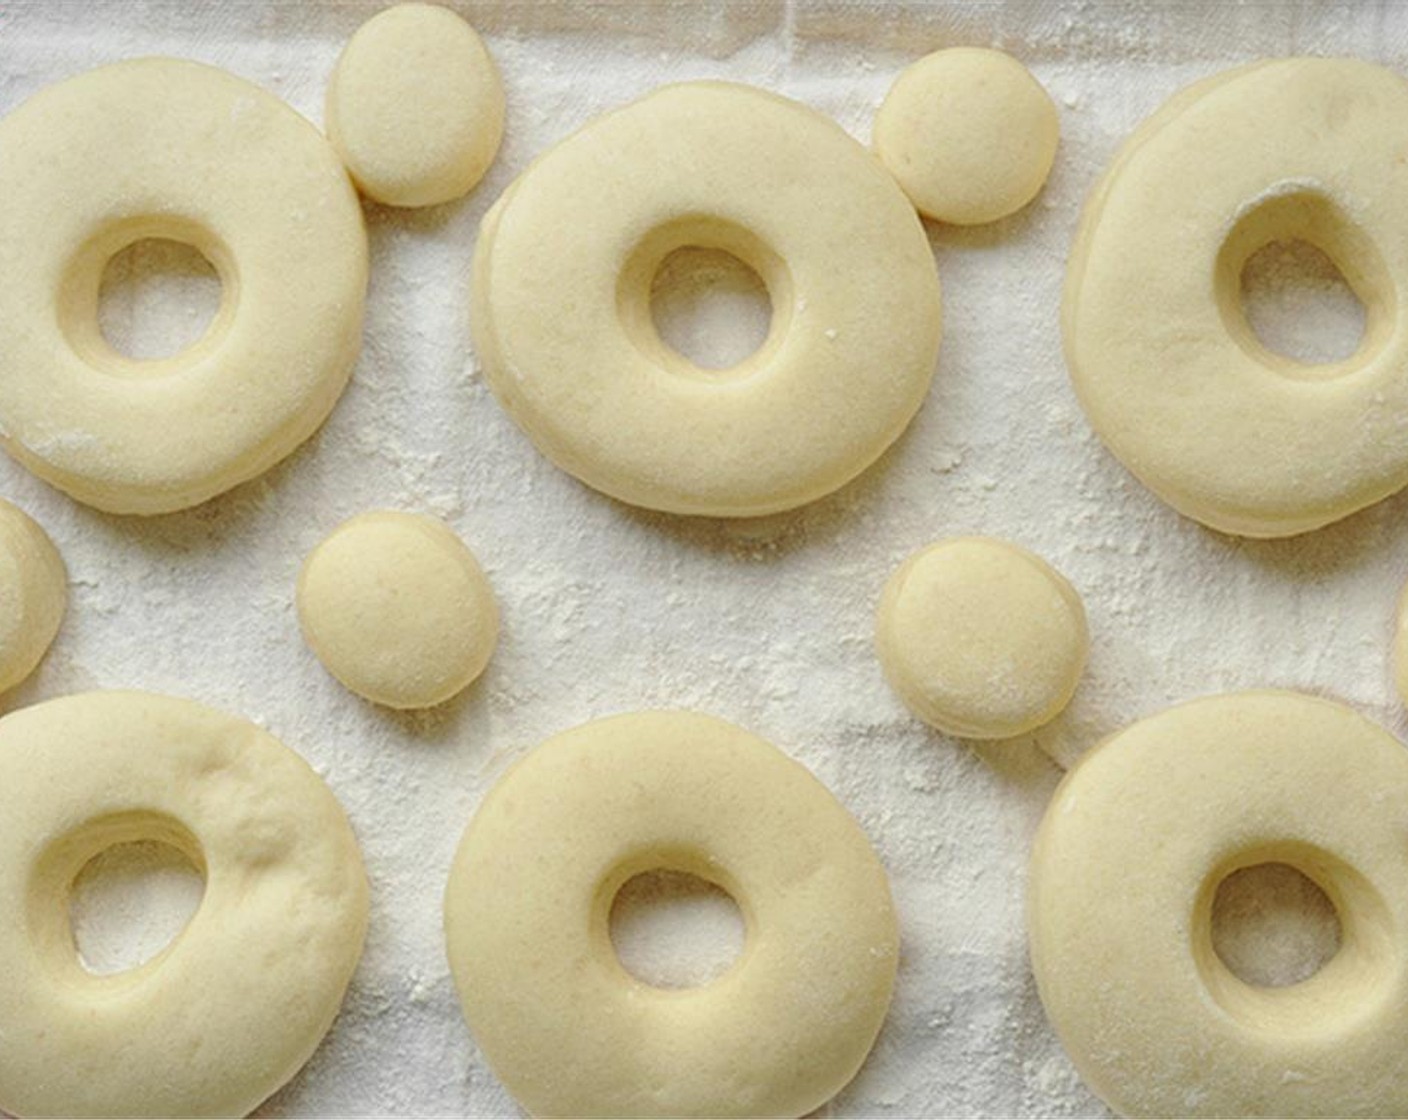 step 9 Allow to double in size, 5 to 20 minutes, checking every 5 minutes to see if they are ready. You’ll know the doughnuts have proofed properly when you touch one lightly with your fingertip. If it springs back right away, it needs more time.